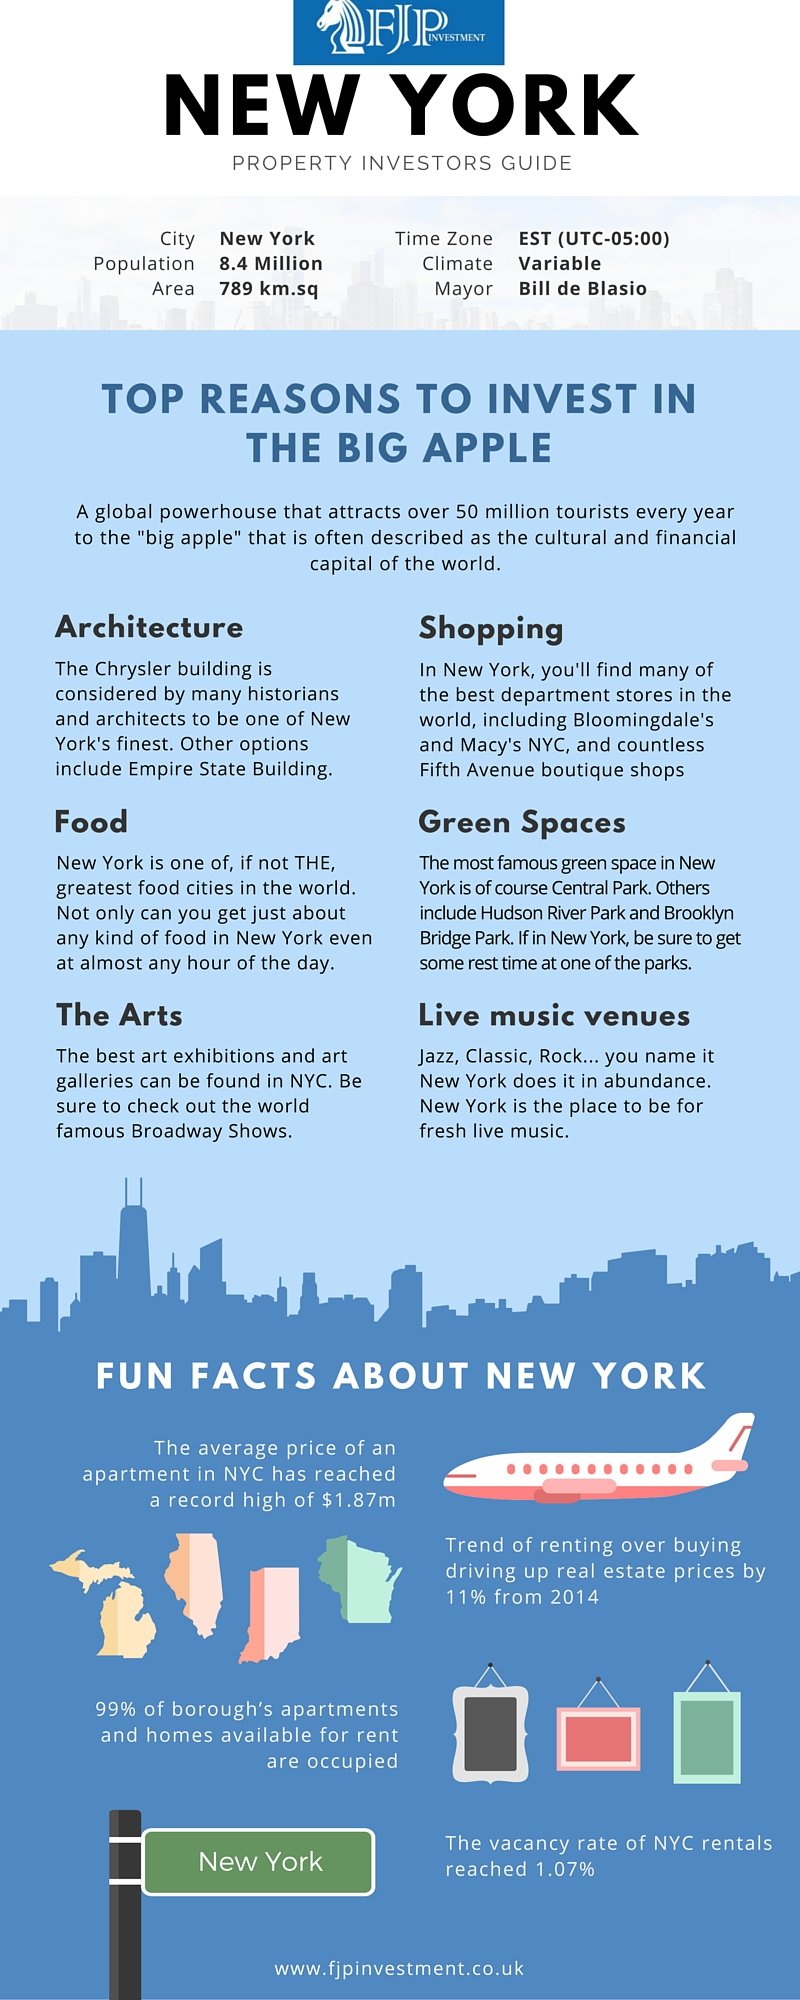 New York Property Investors Guide Infographic